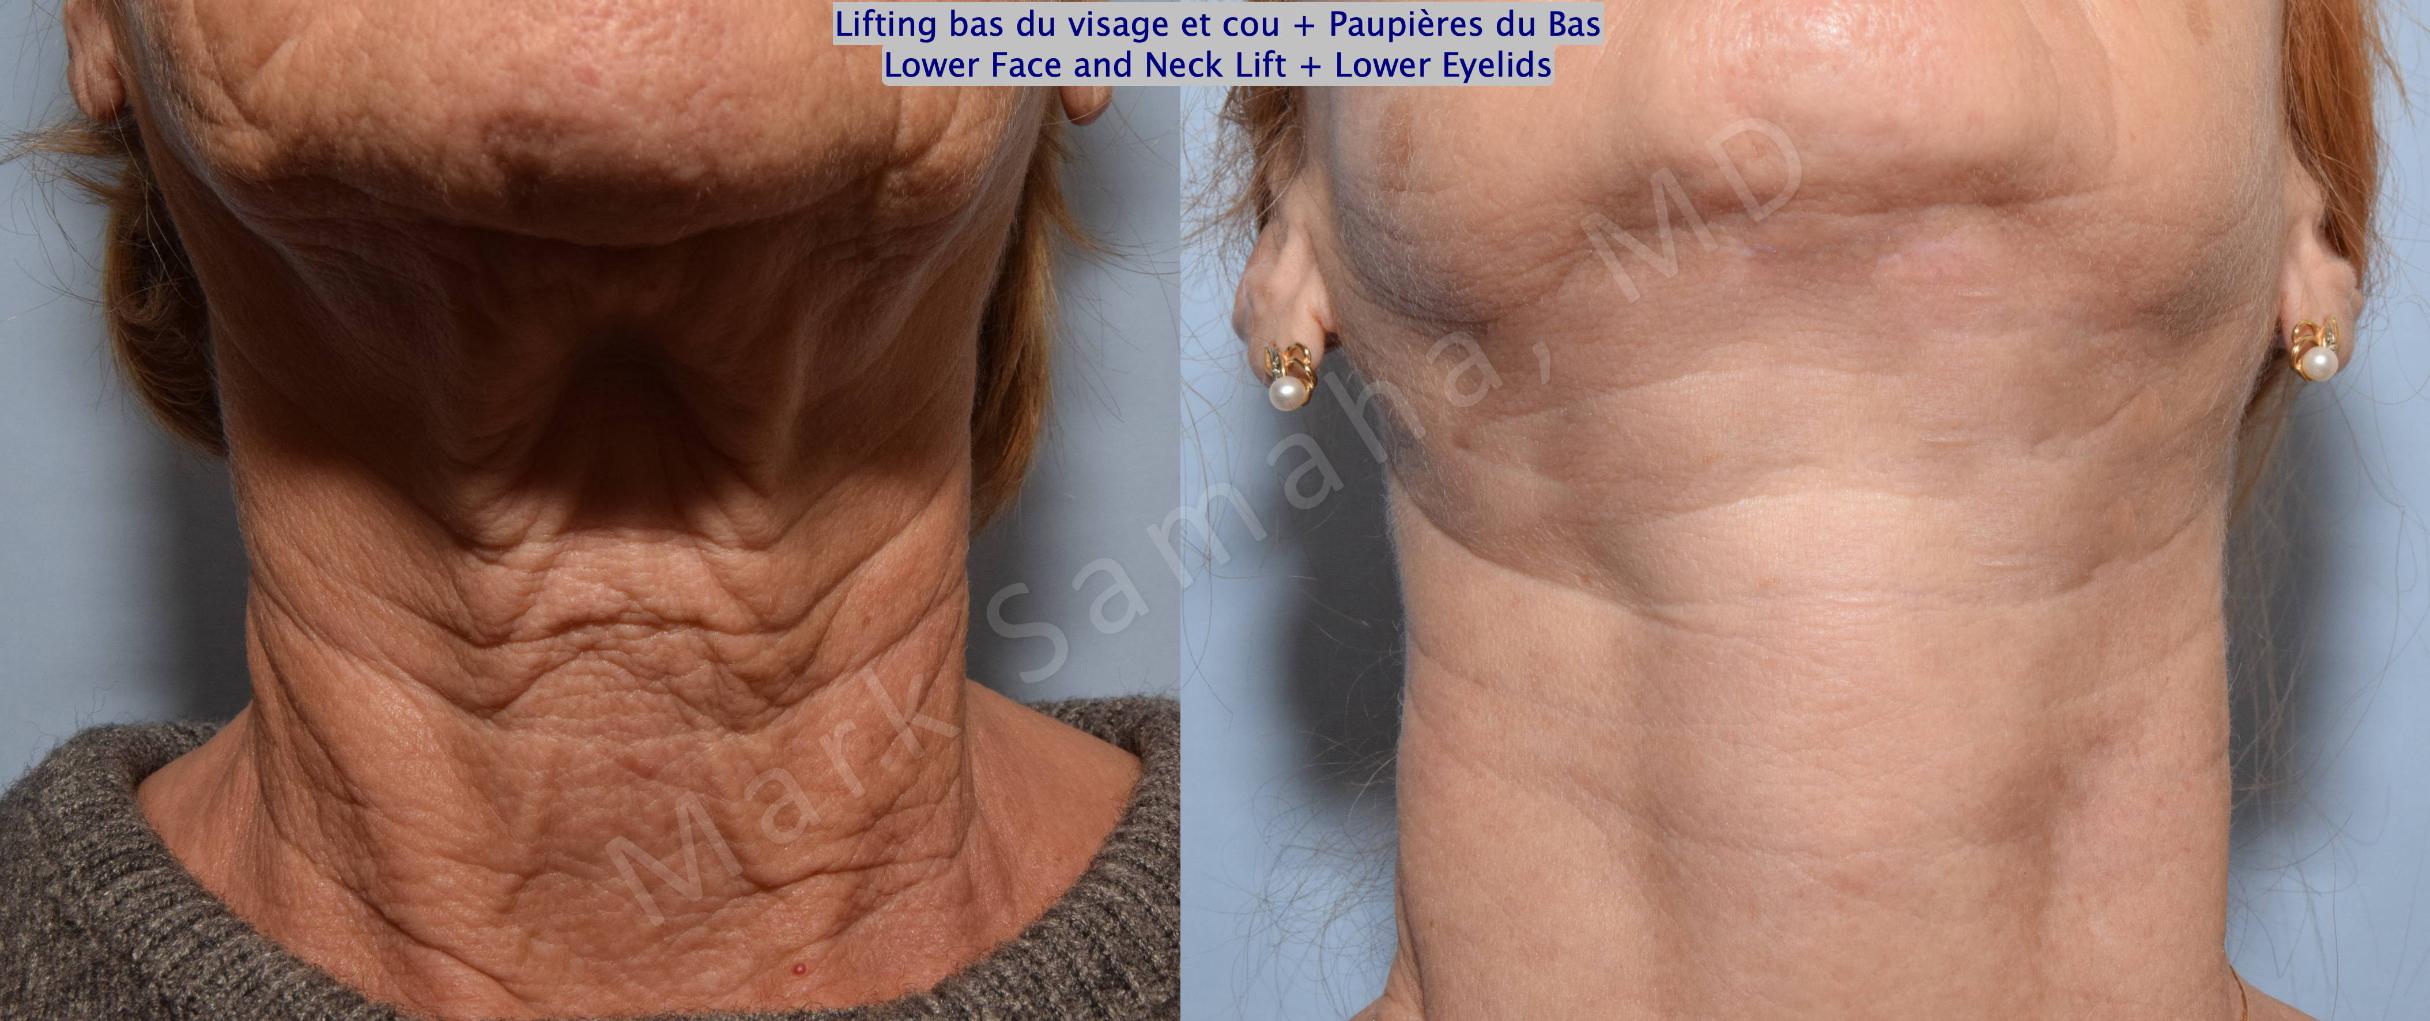 Before & After Facelift / Necklift - Lifting du visage / Cou Case 128 View #2 View in Mount Royal, QC